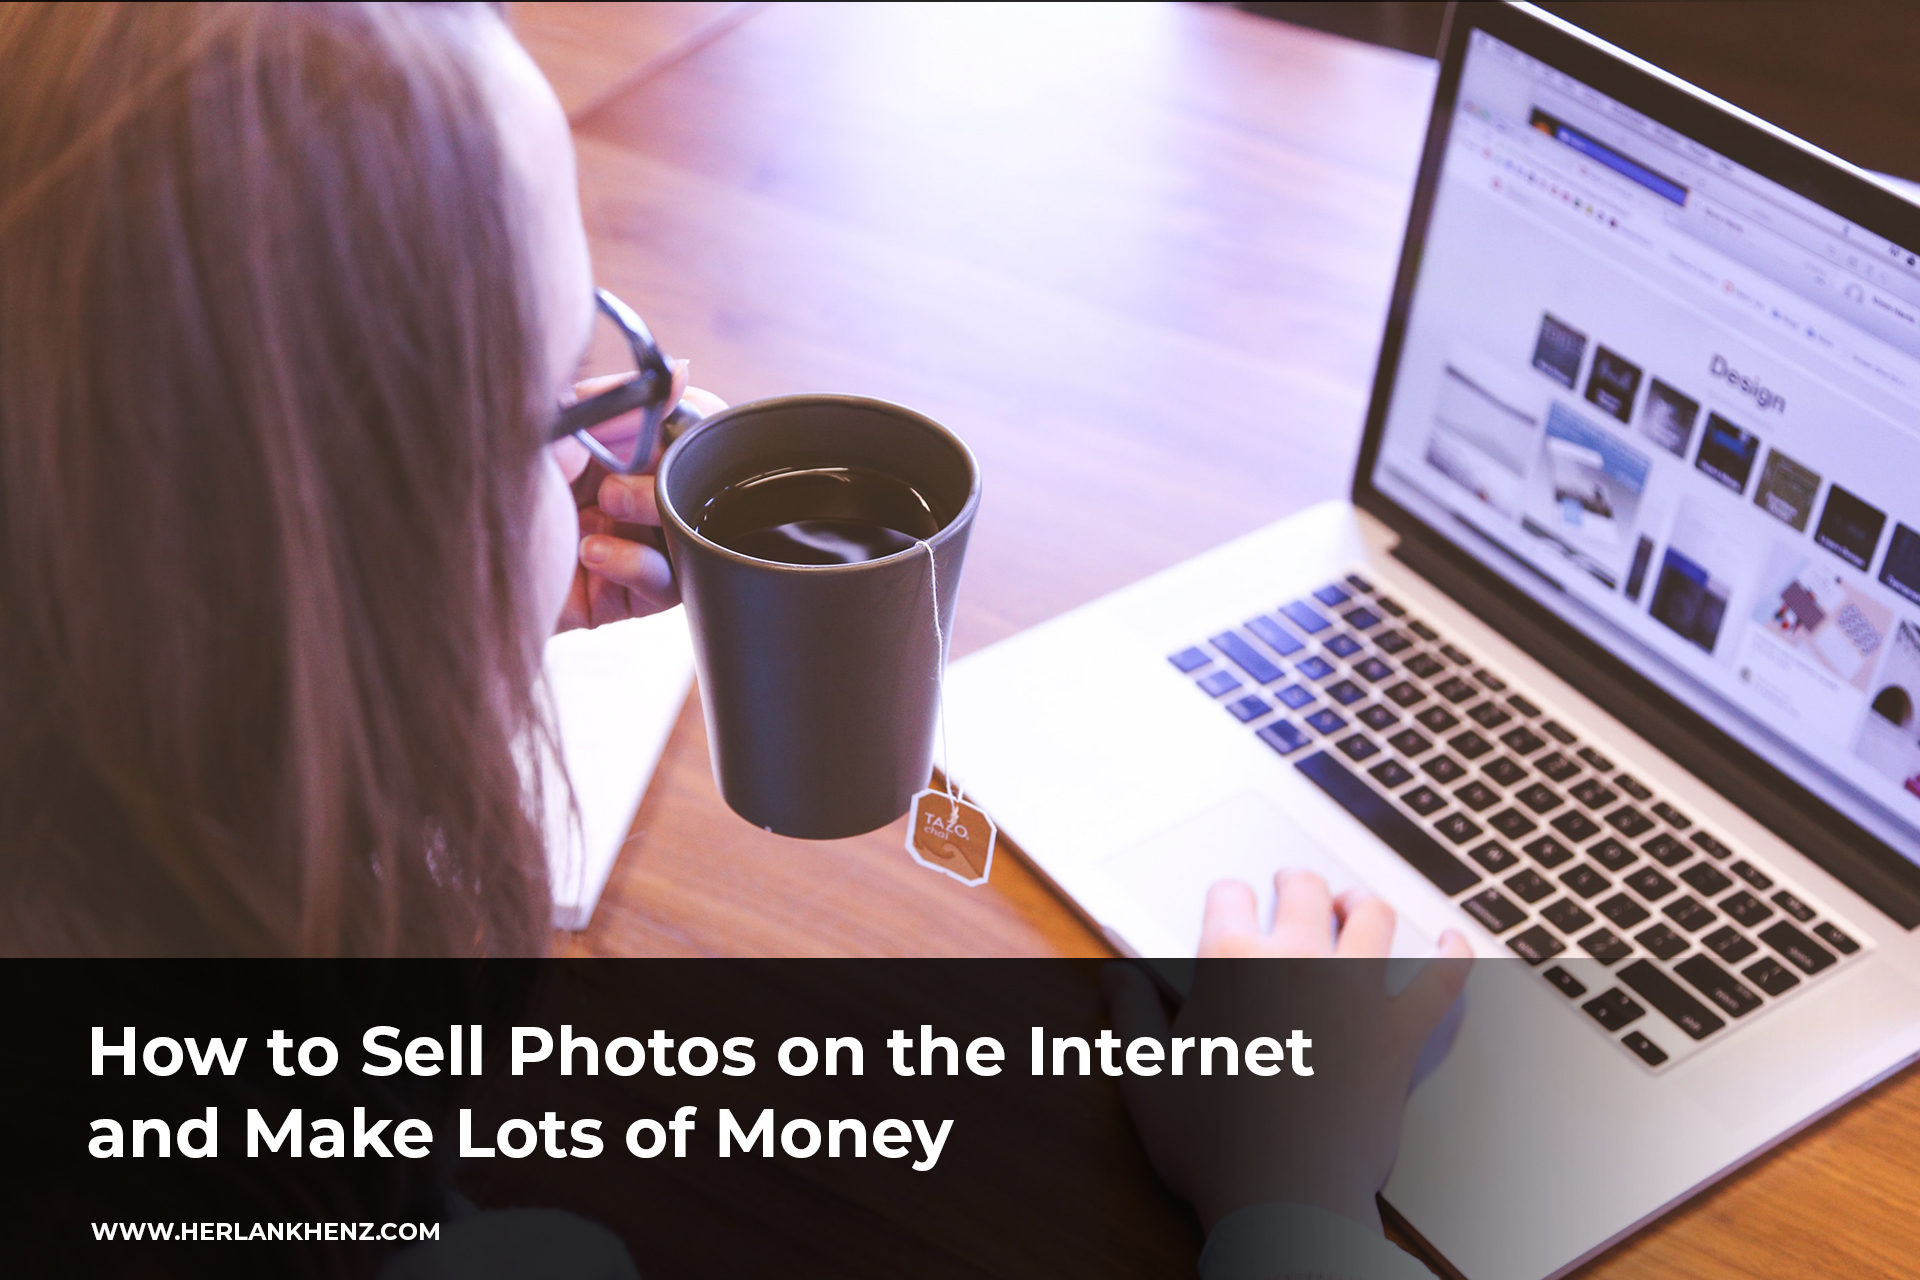 How to Sell Photos on the Internet and Make Lots of Money